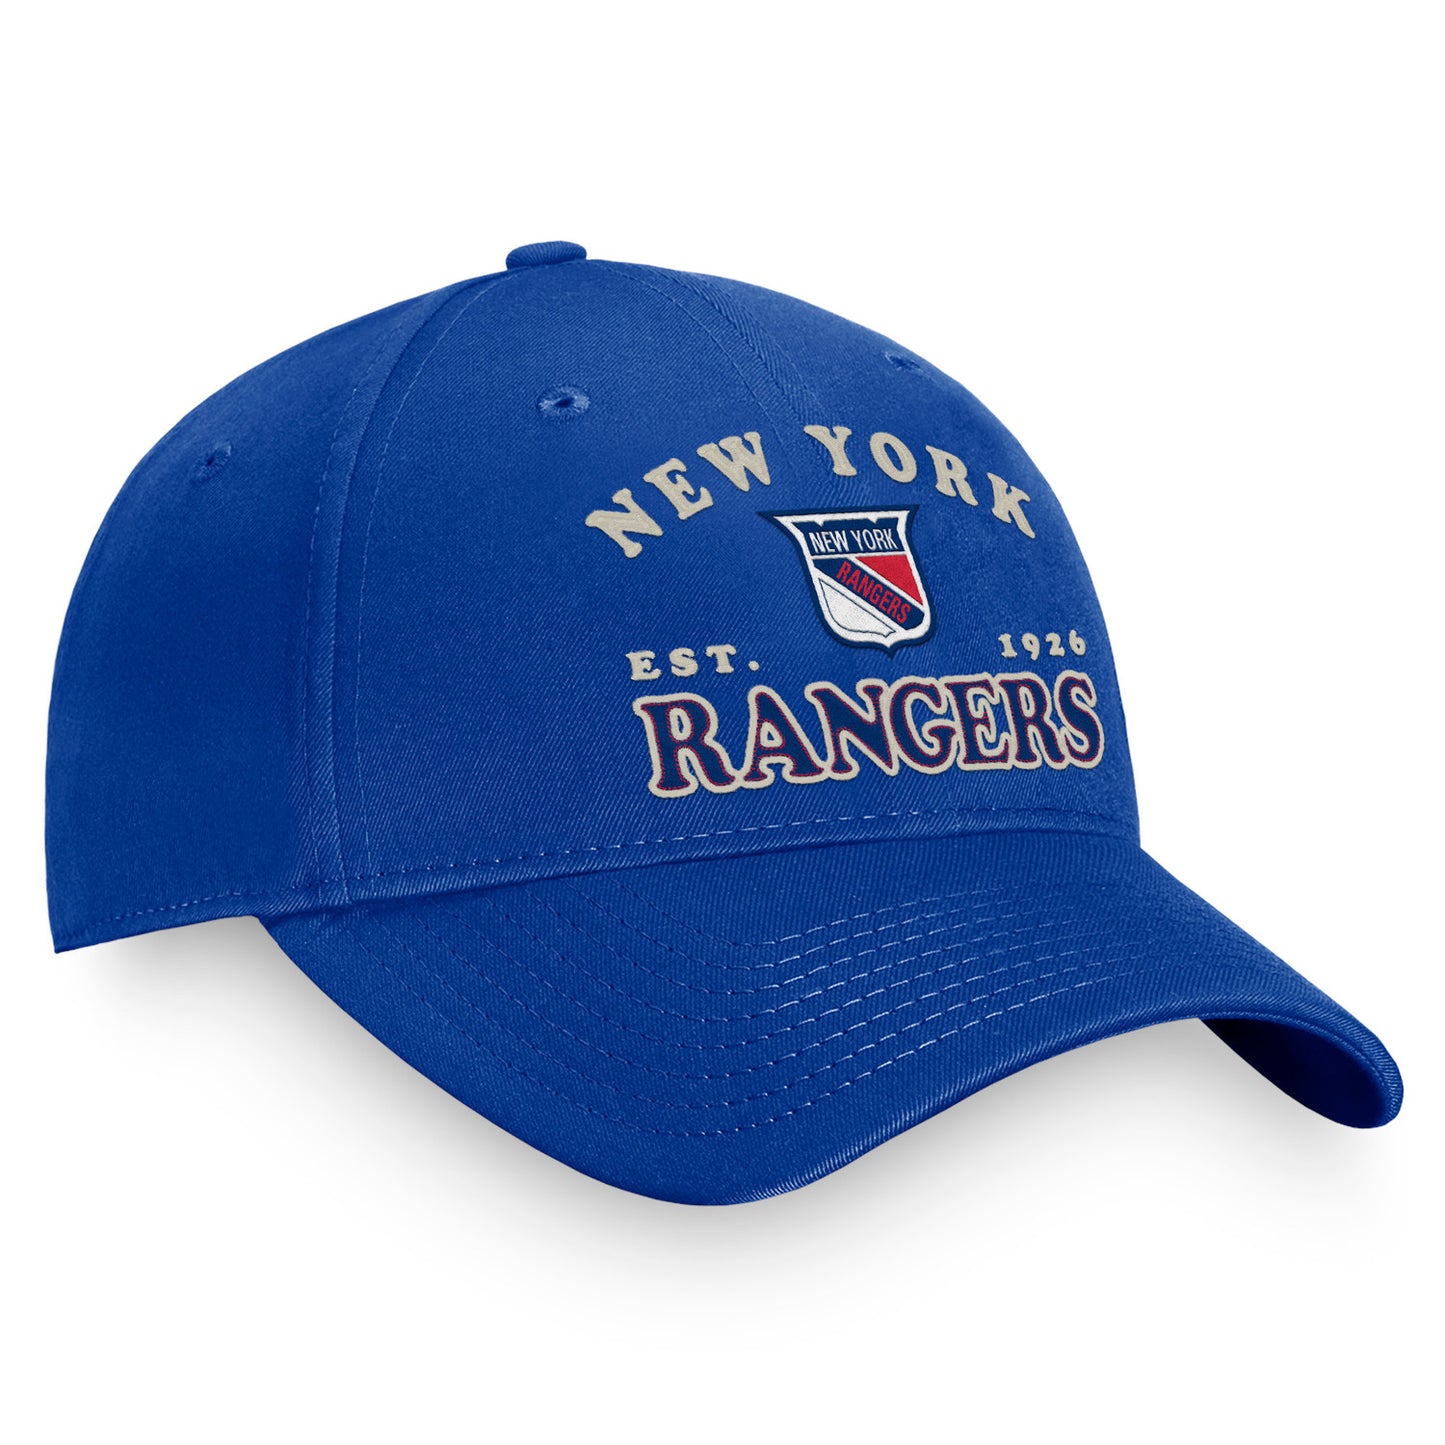 Fanatics Rangers Heritage Adjustable Hat - Angled Right View